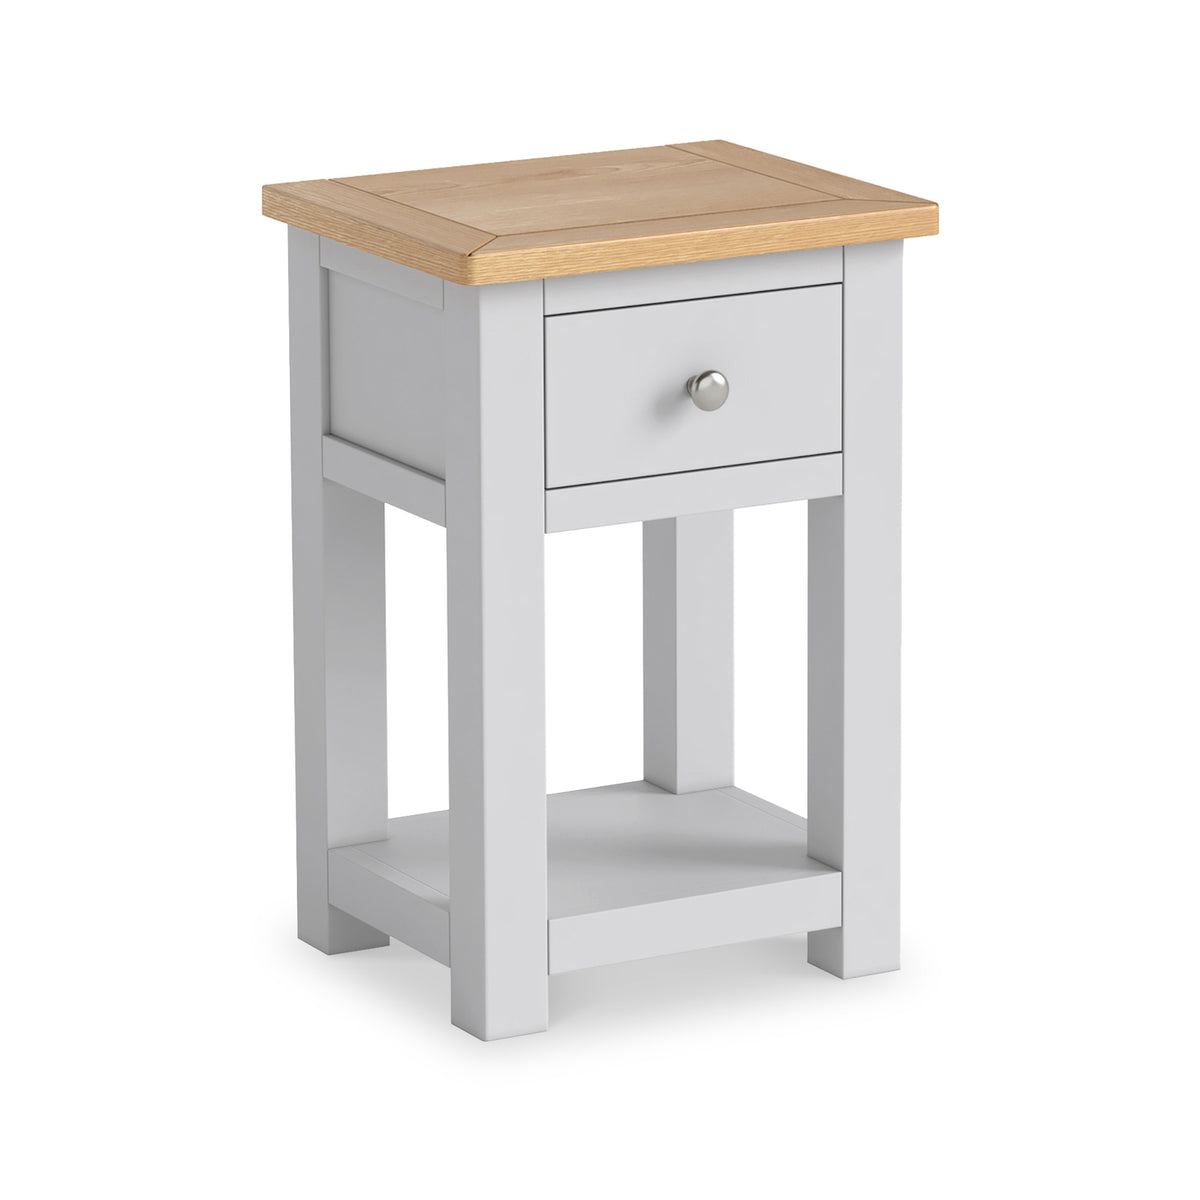 Duchy Inox 1 Drawer Bedside Table with Oak Top from Roseland Furniture